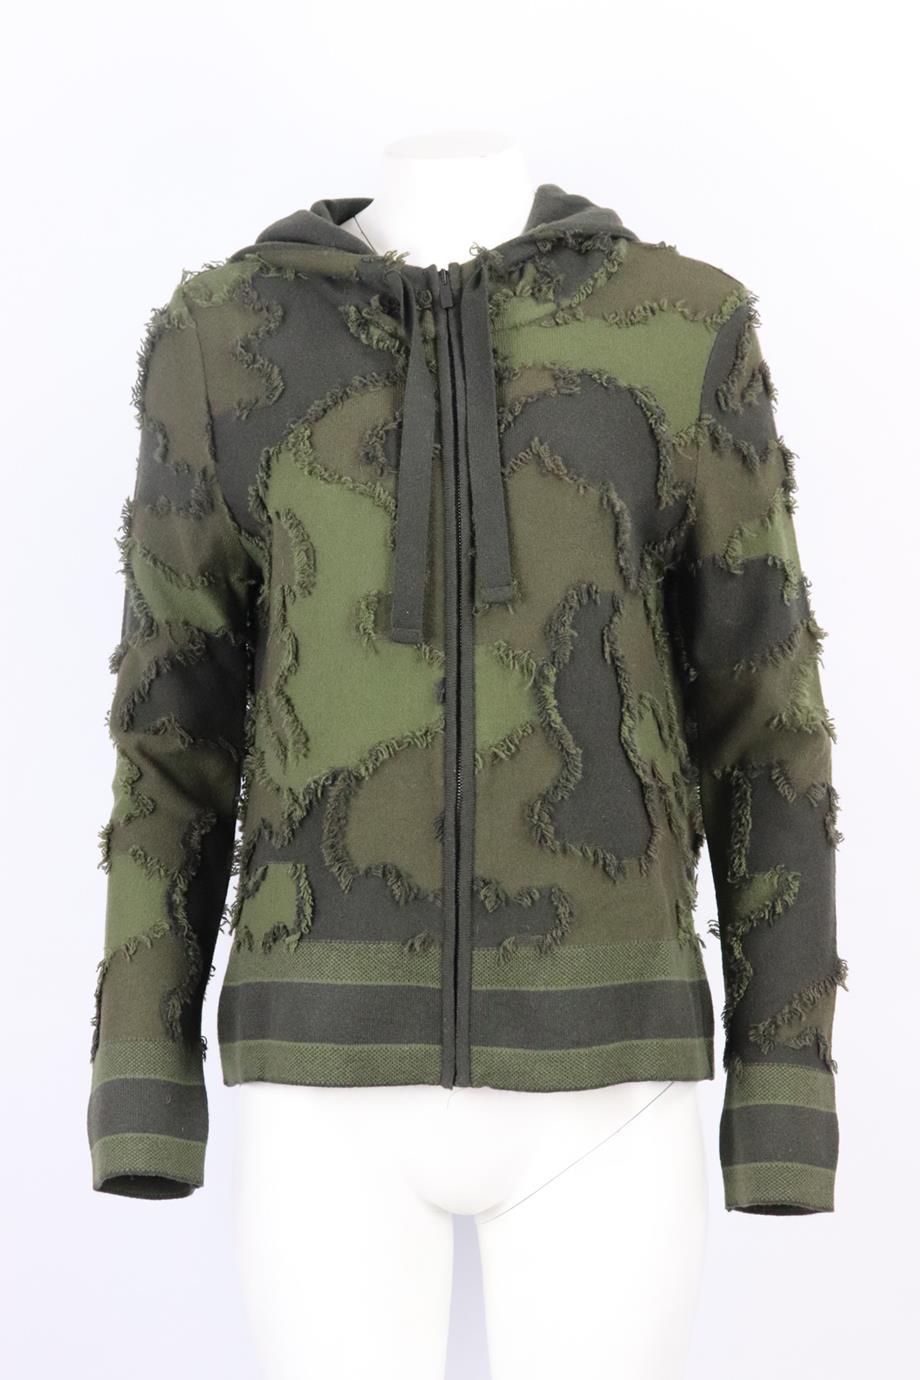 Christian Dior 2020 camouflage intarsia cashmere blend hoodie. Khaki-green. Long sleeve, crewneck. Zip up fastening at front. 99% Cashmere, 1% nylon. Size: FR 44 (UK 16, US 12, IT 48). Bust: 41 in. Waist: 39 in. Hips: 41 in. Length: 21 in. Very good